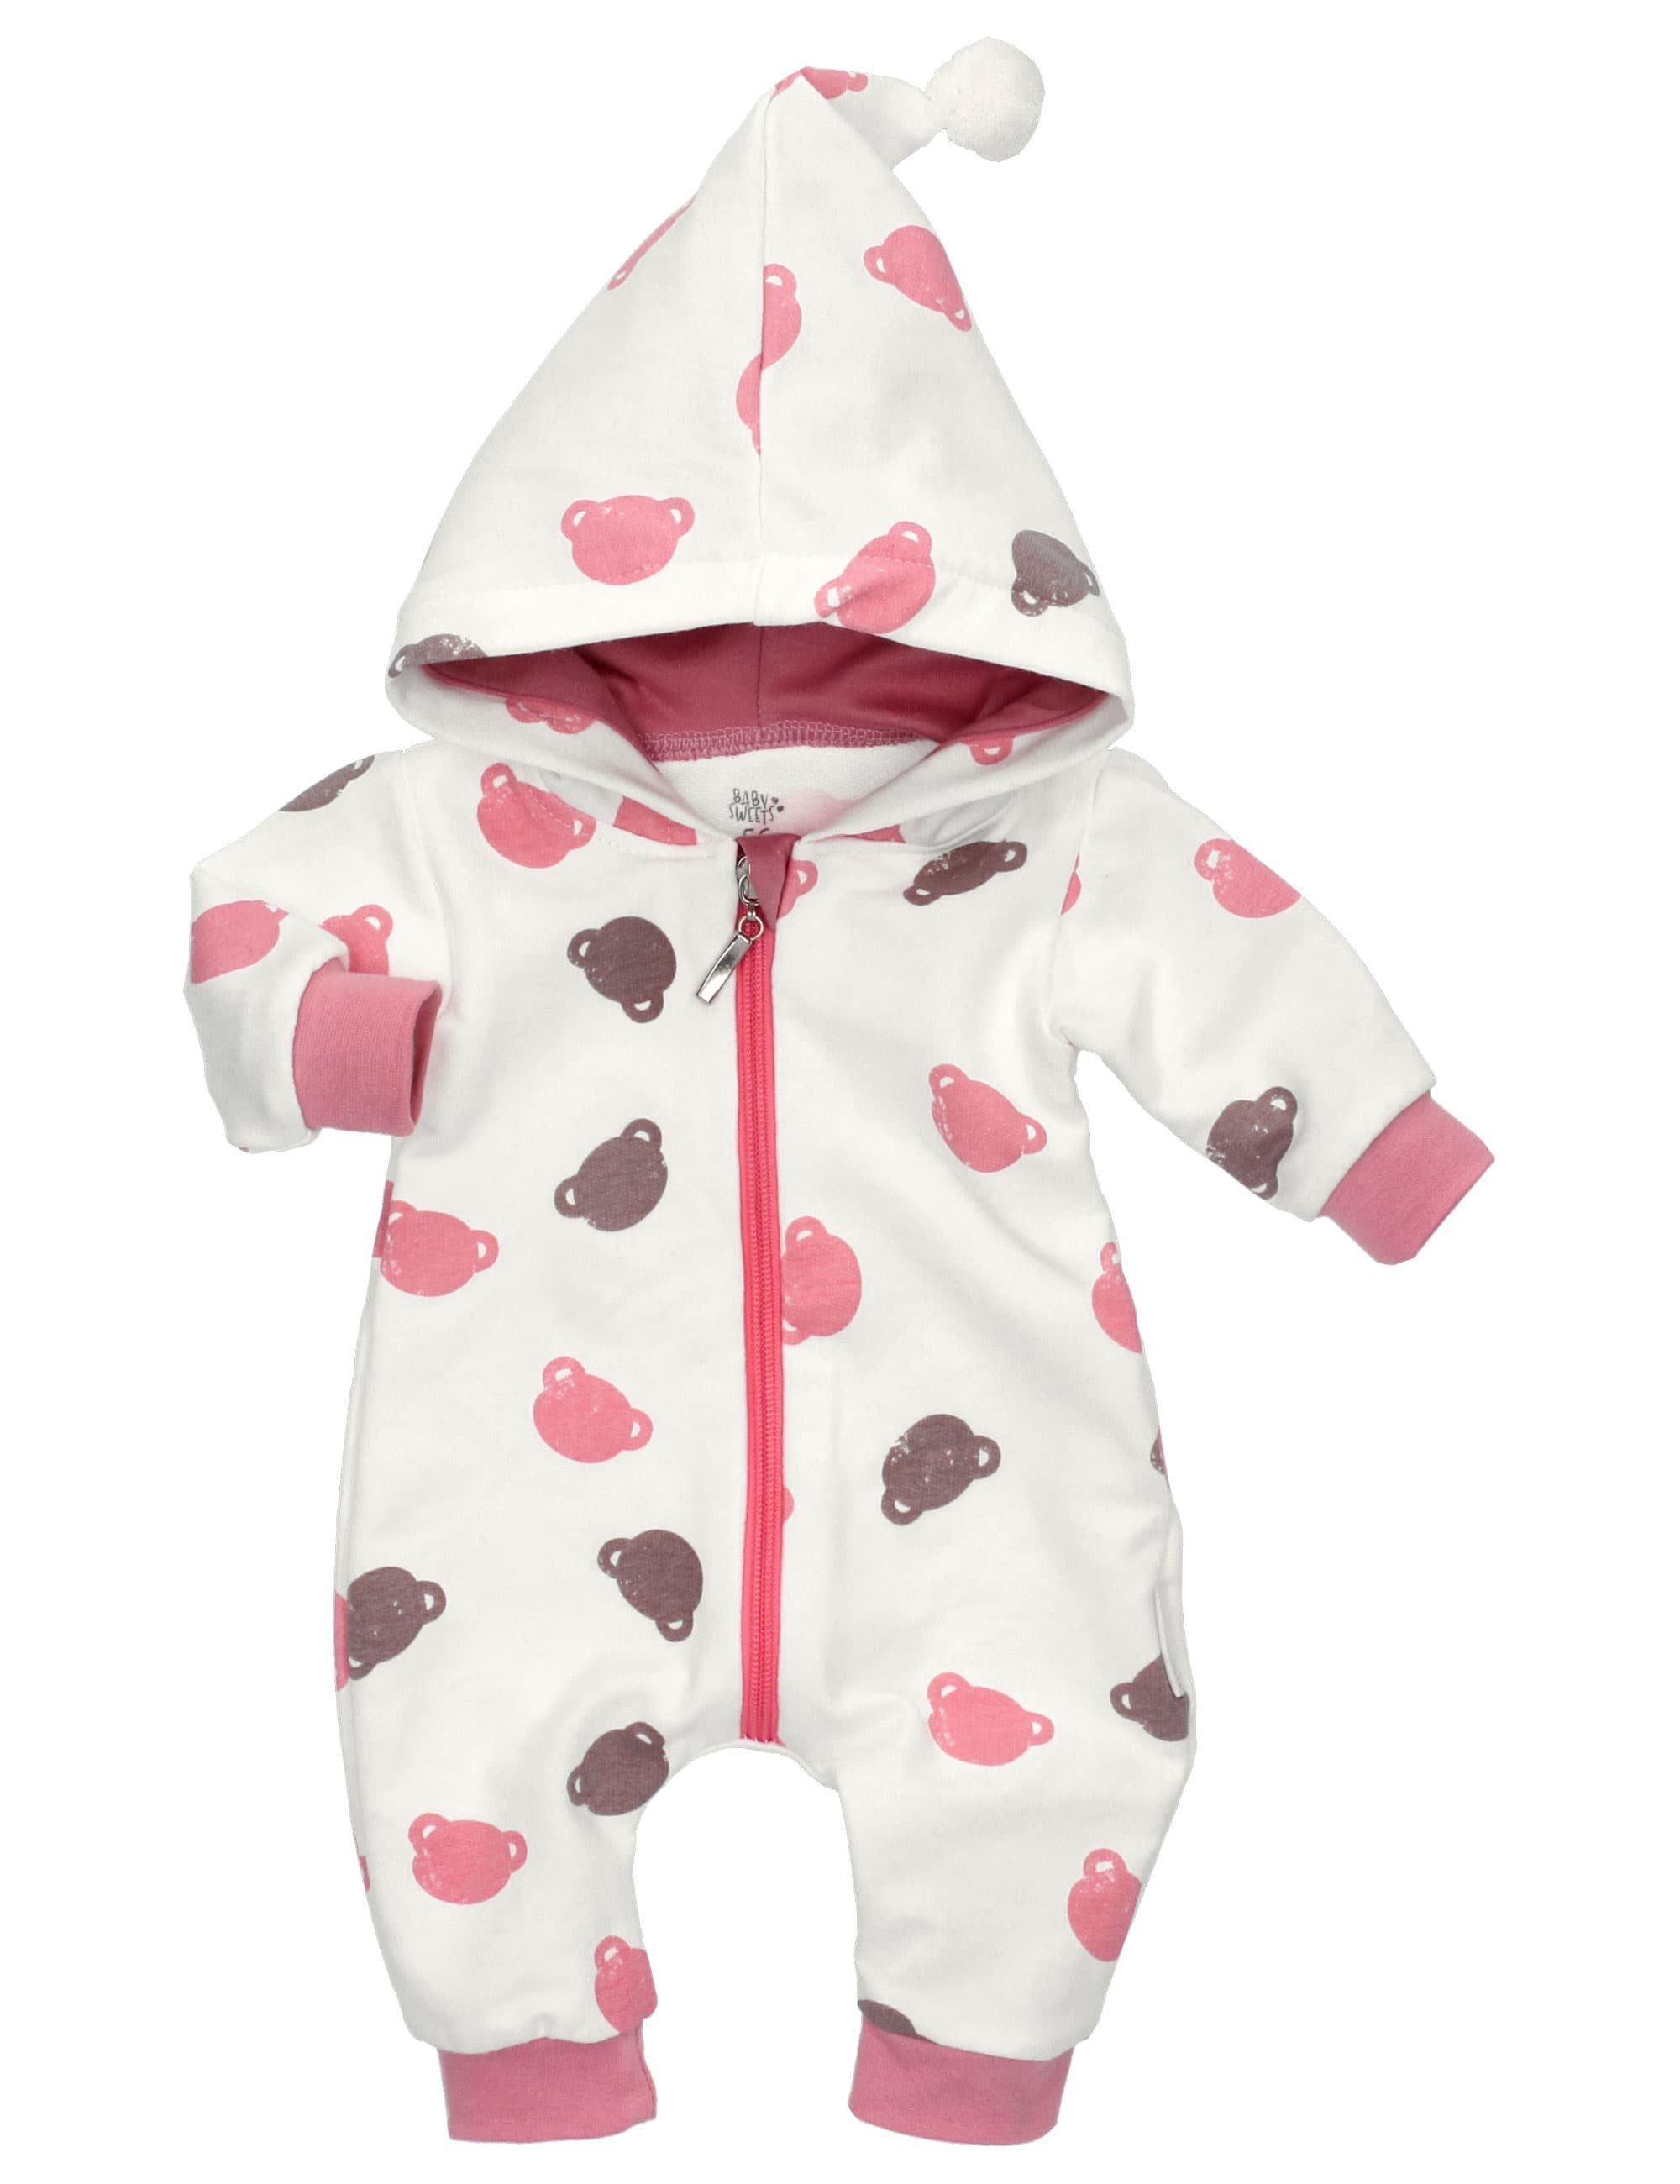 Baby Sweets Overall Strampler, Overall Koala (1-tlg) weiß rosa